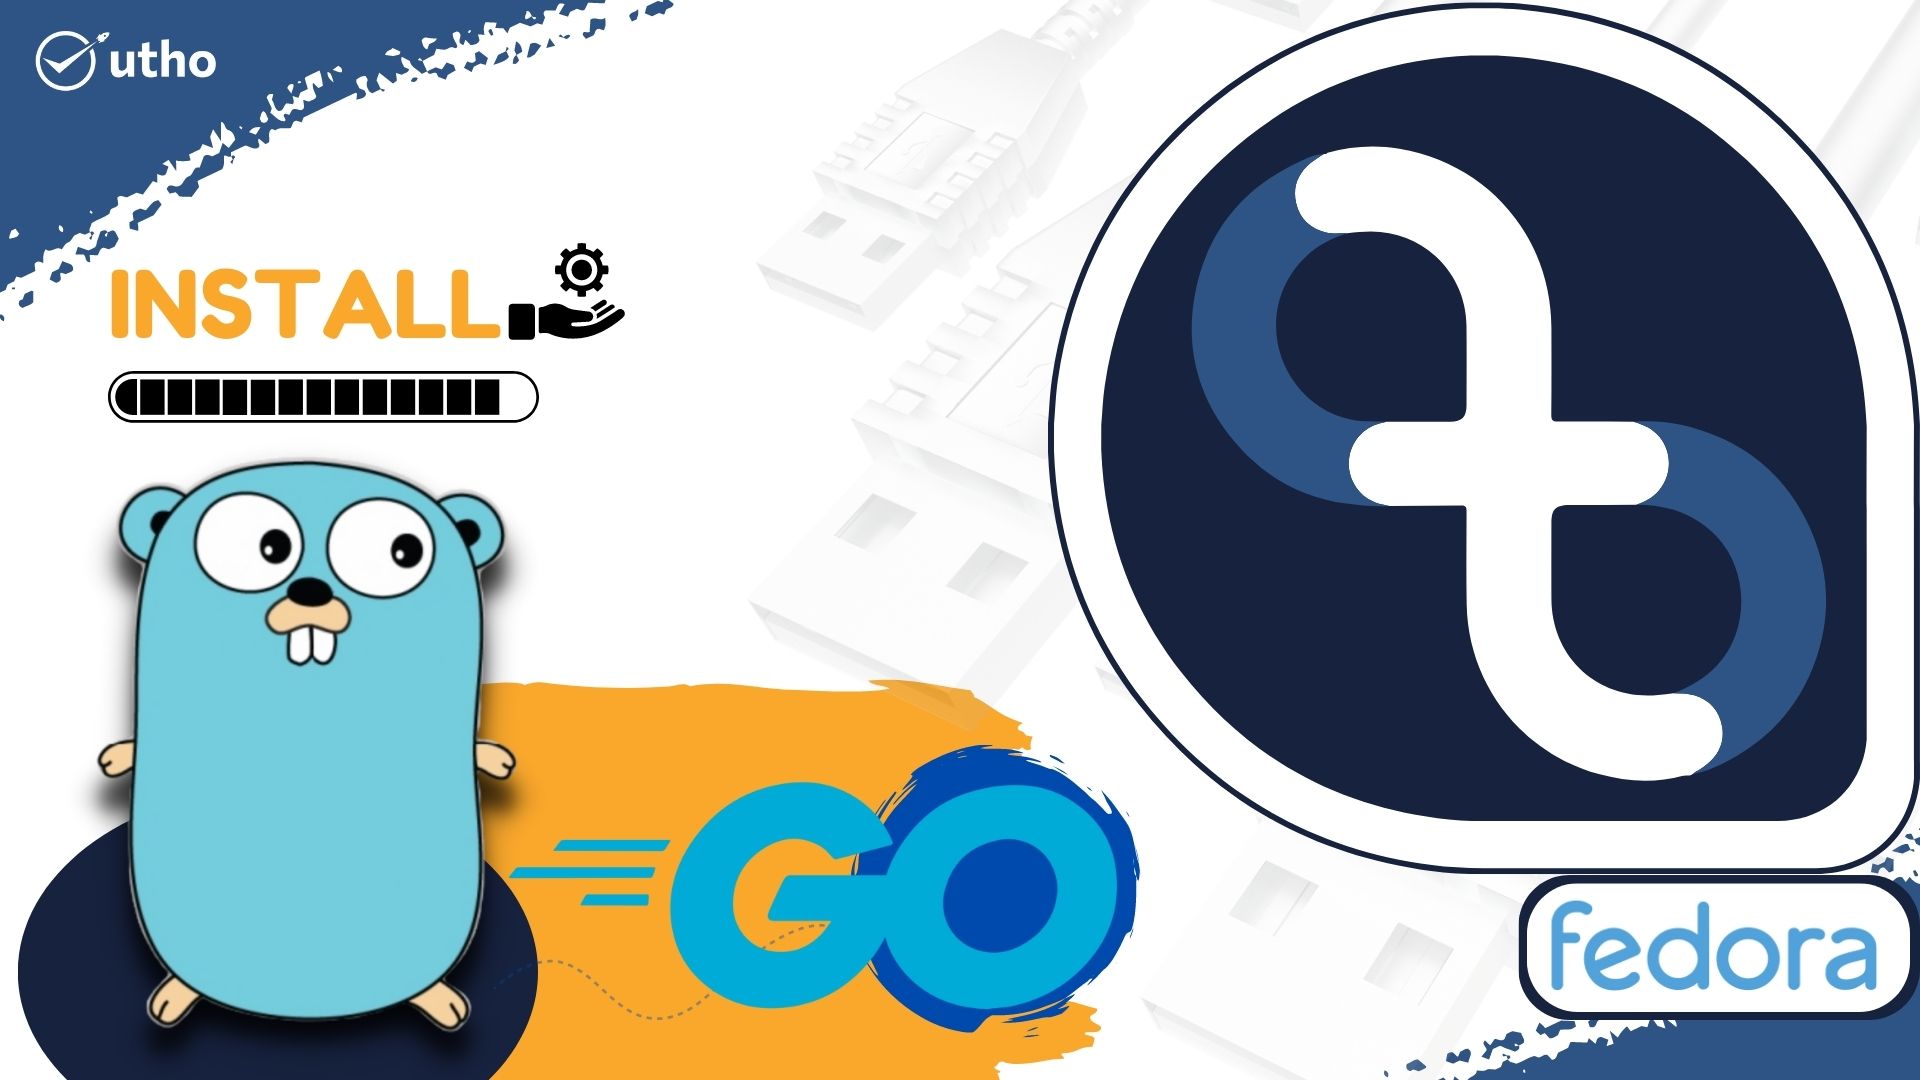 How to install Go on Fedora